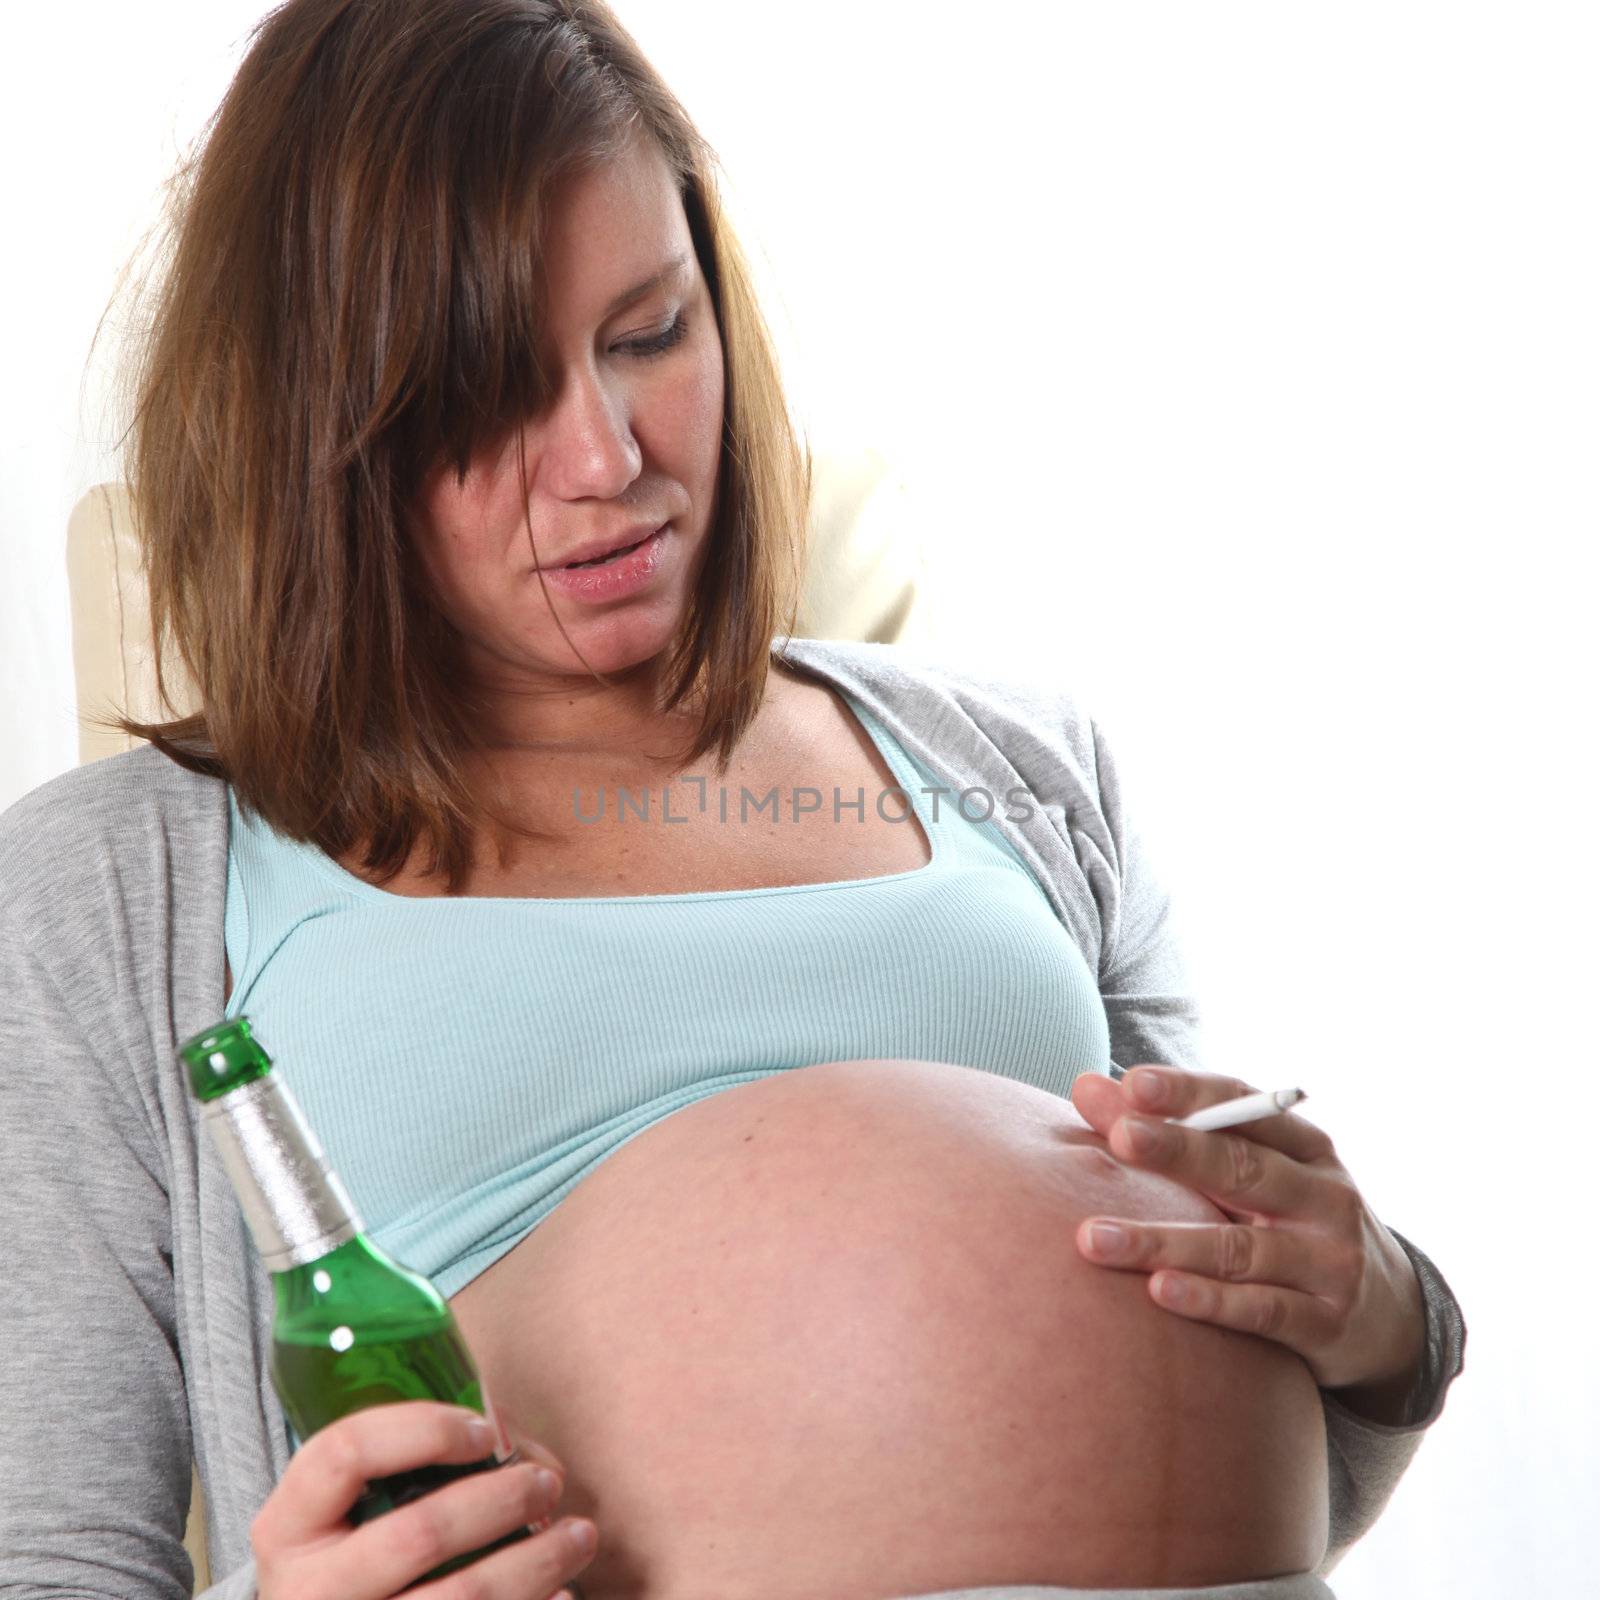 Alcohol and drugs - risk to the unborn baby by Farina6000